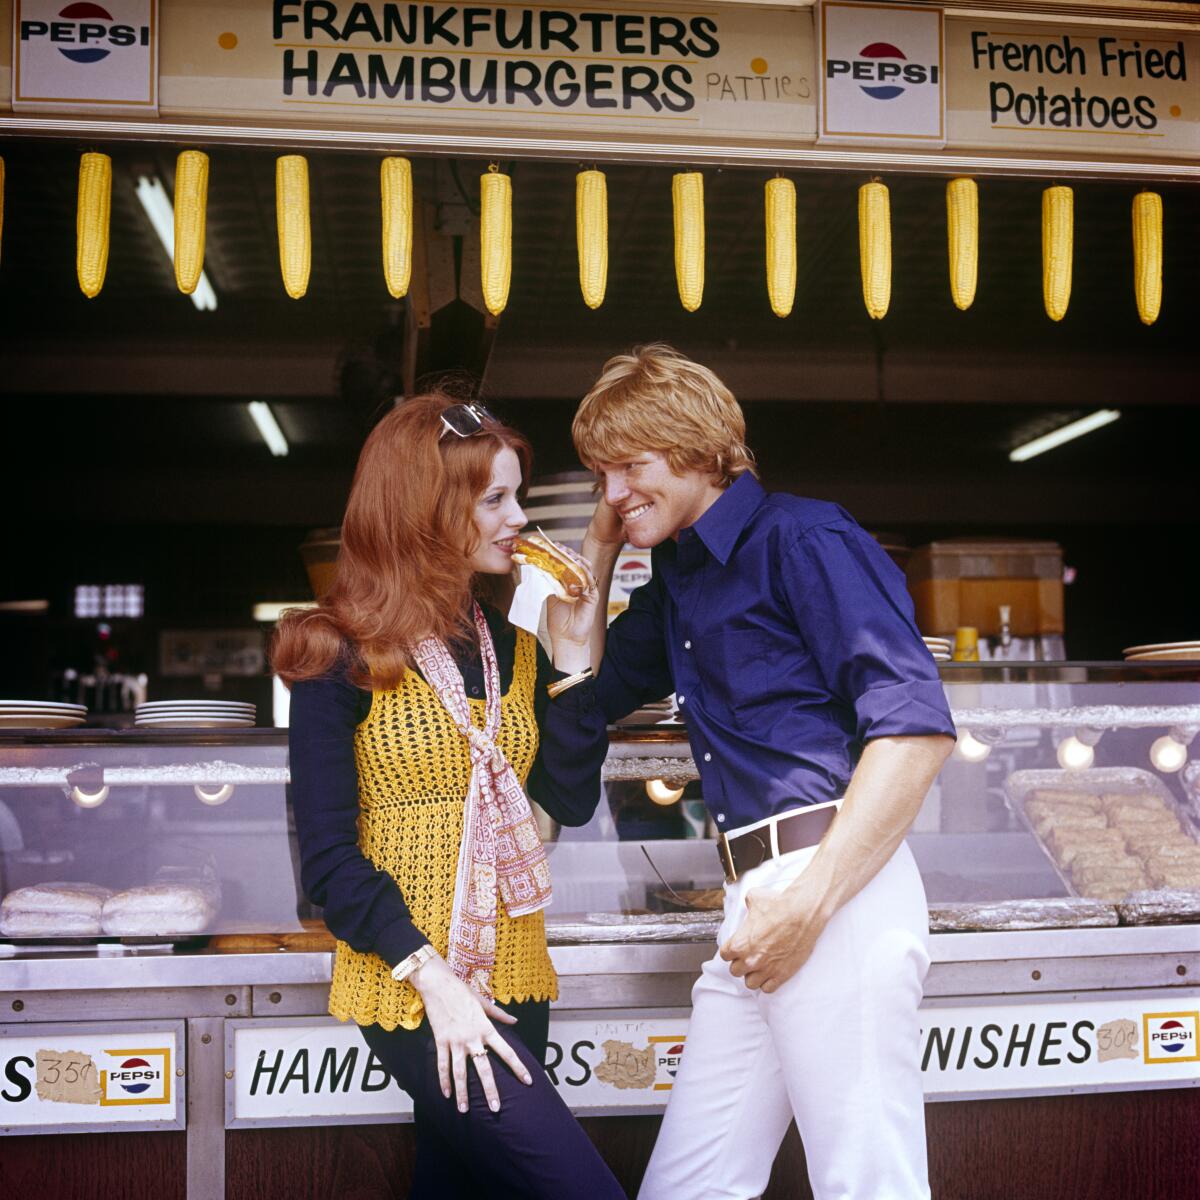 A couple in the 1970s at a concession stand.